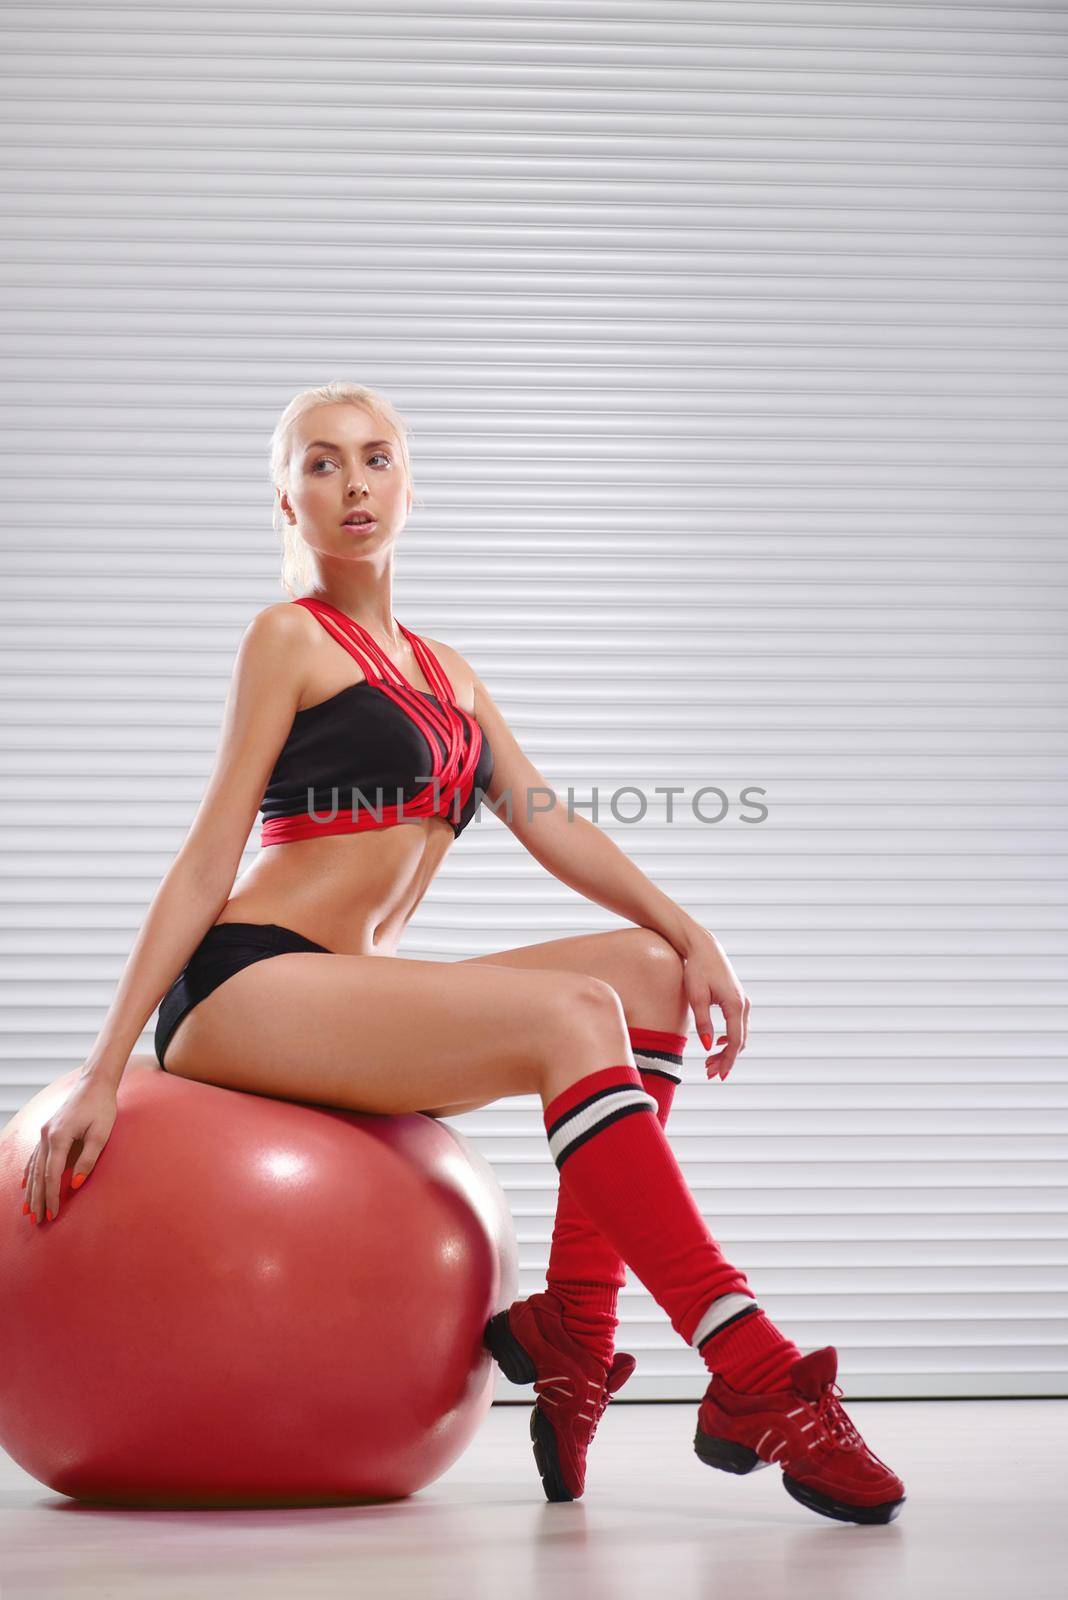 Beautiful young sporty girl wearing sports top and shorts sitting on a fitness ball after her workout relaxation confidence fit toned muscular abs sexy hot lifestyle physique personal trainer gym .